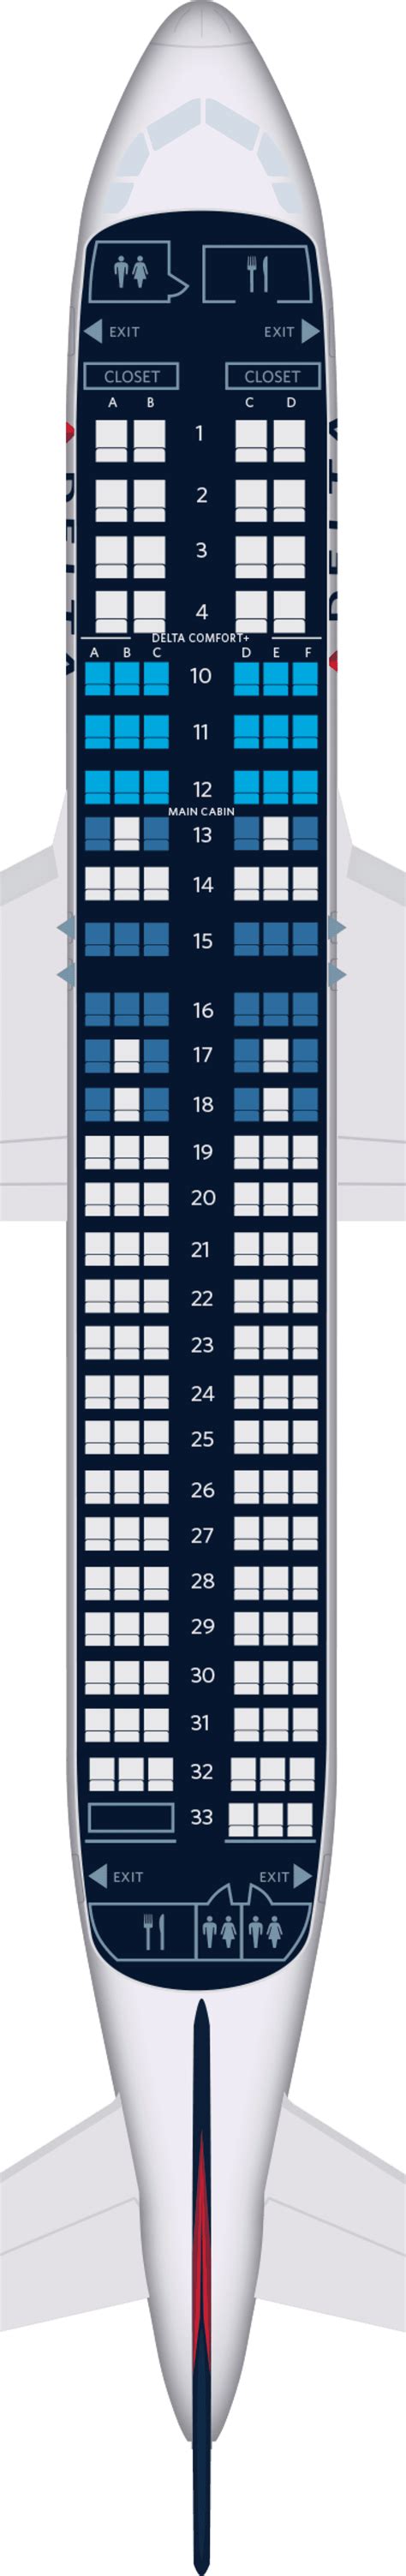 First cabin version of the Airbus A320-200 (32R) First version (most common) of Airbus A320 includes 150 seats. First class of this airplane has 12 recliner seats located in 2-2 configuration. The best seats of this class are the seats 1A, 1B, 1C and 1D. Passengers of these seats may feel more comfortable as they have no seats in front of them .... 